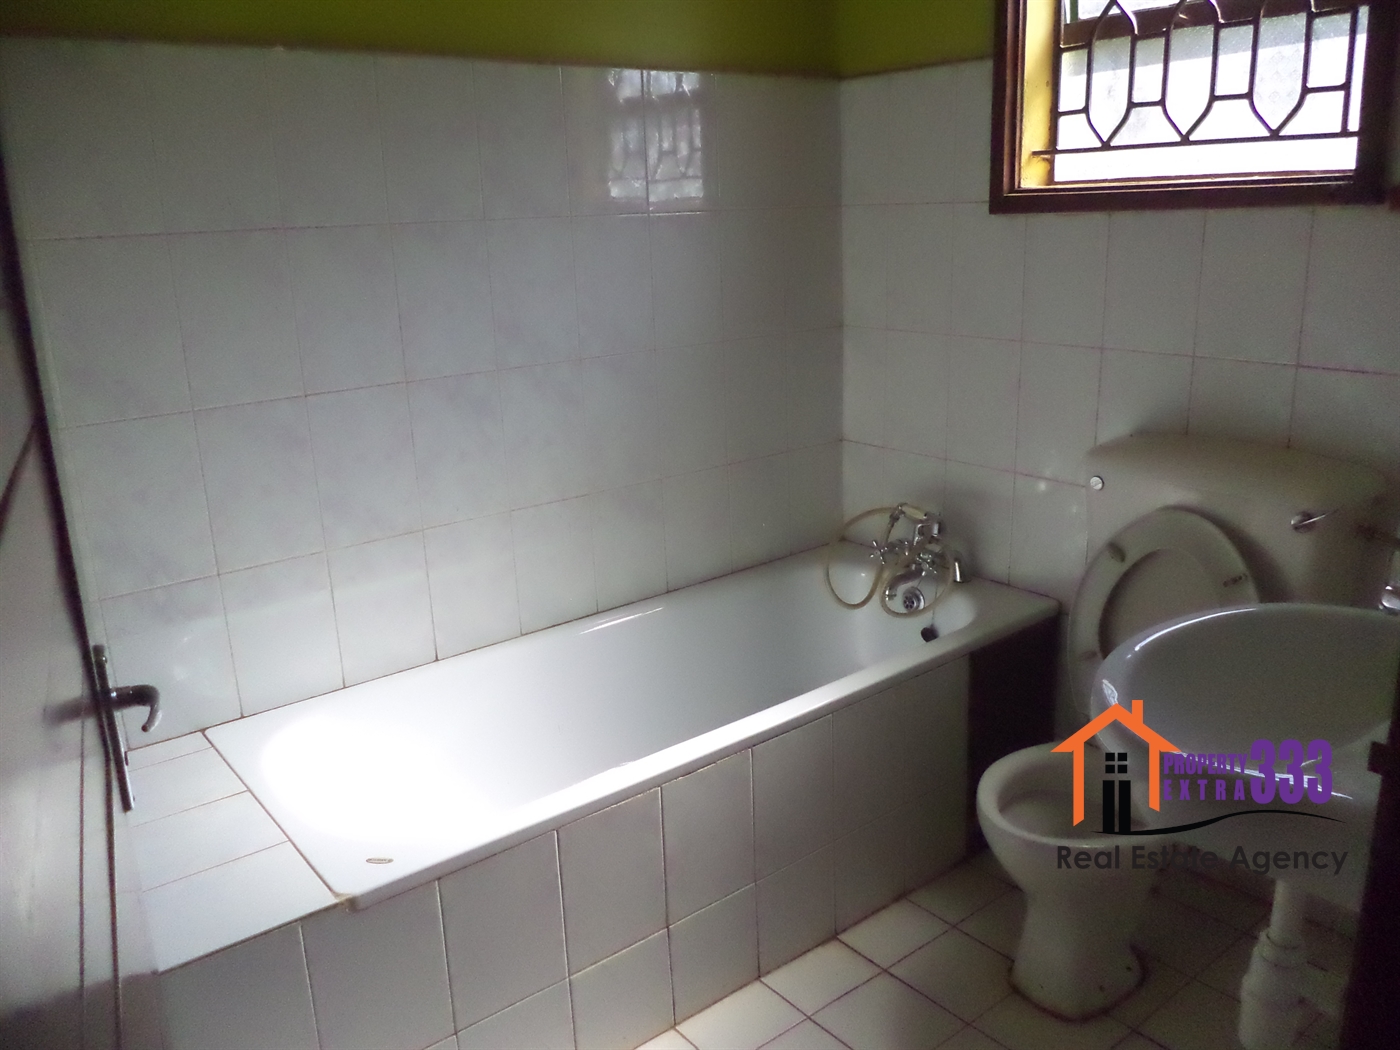 Bungalow for rent in Mulago Kampala